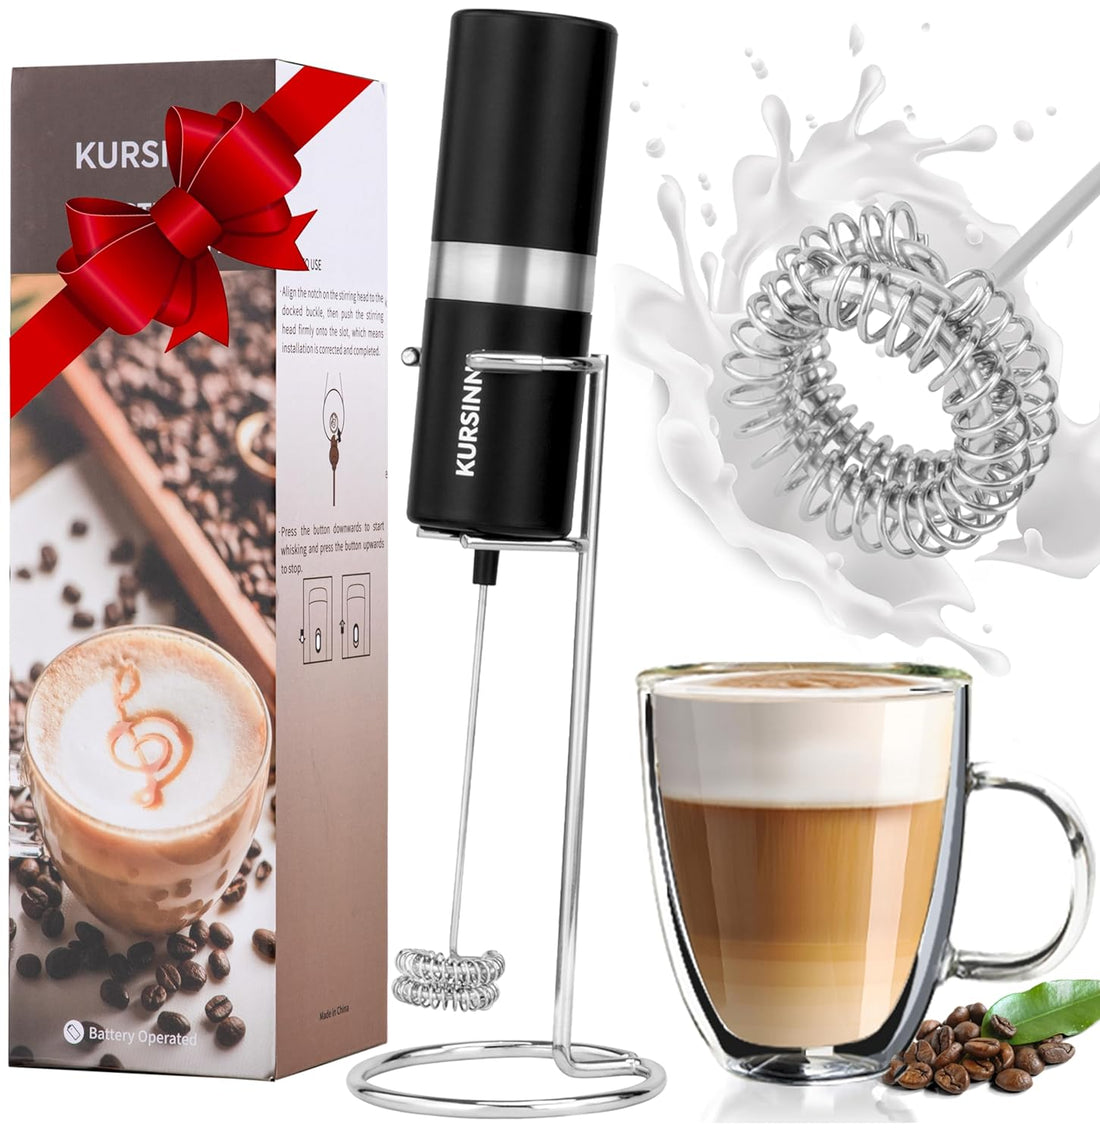 KURSINNA Powerful Milk Frother Handheld Battery Operated, Double Whisk Foam Frother Maker with Stainless Steel Stand, Drink Mixer For Coffee, Lattes, Matcha, Cappuccino (Battery Operated+Stand)